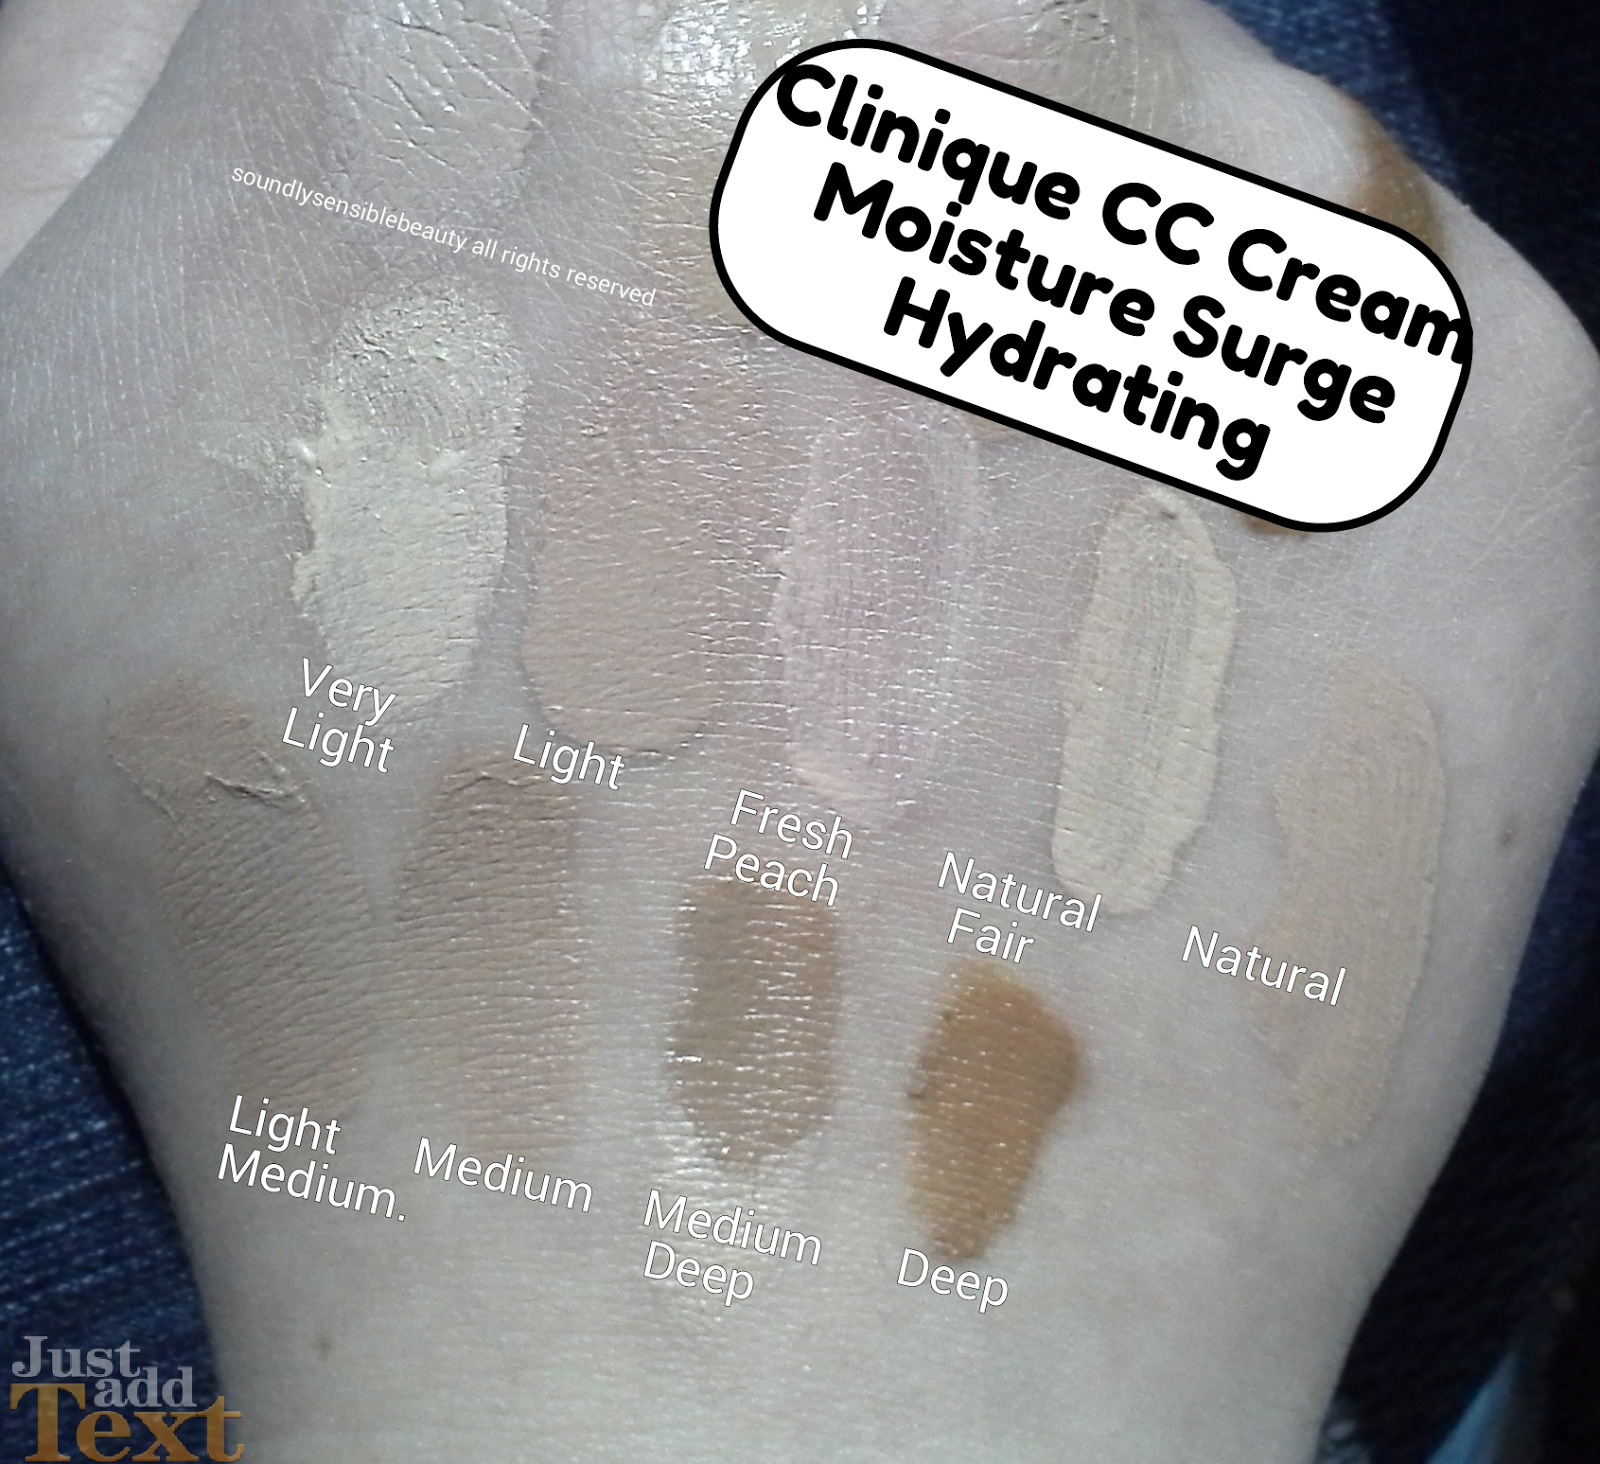 Clinique CC Cream Moisture Surge Hydrating Color Corrector SPF 30; Review &  Swatches of Shades